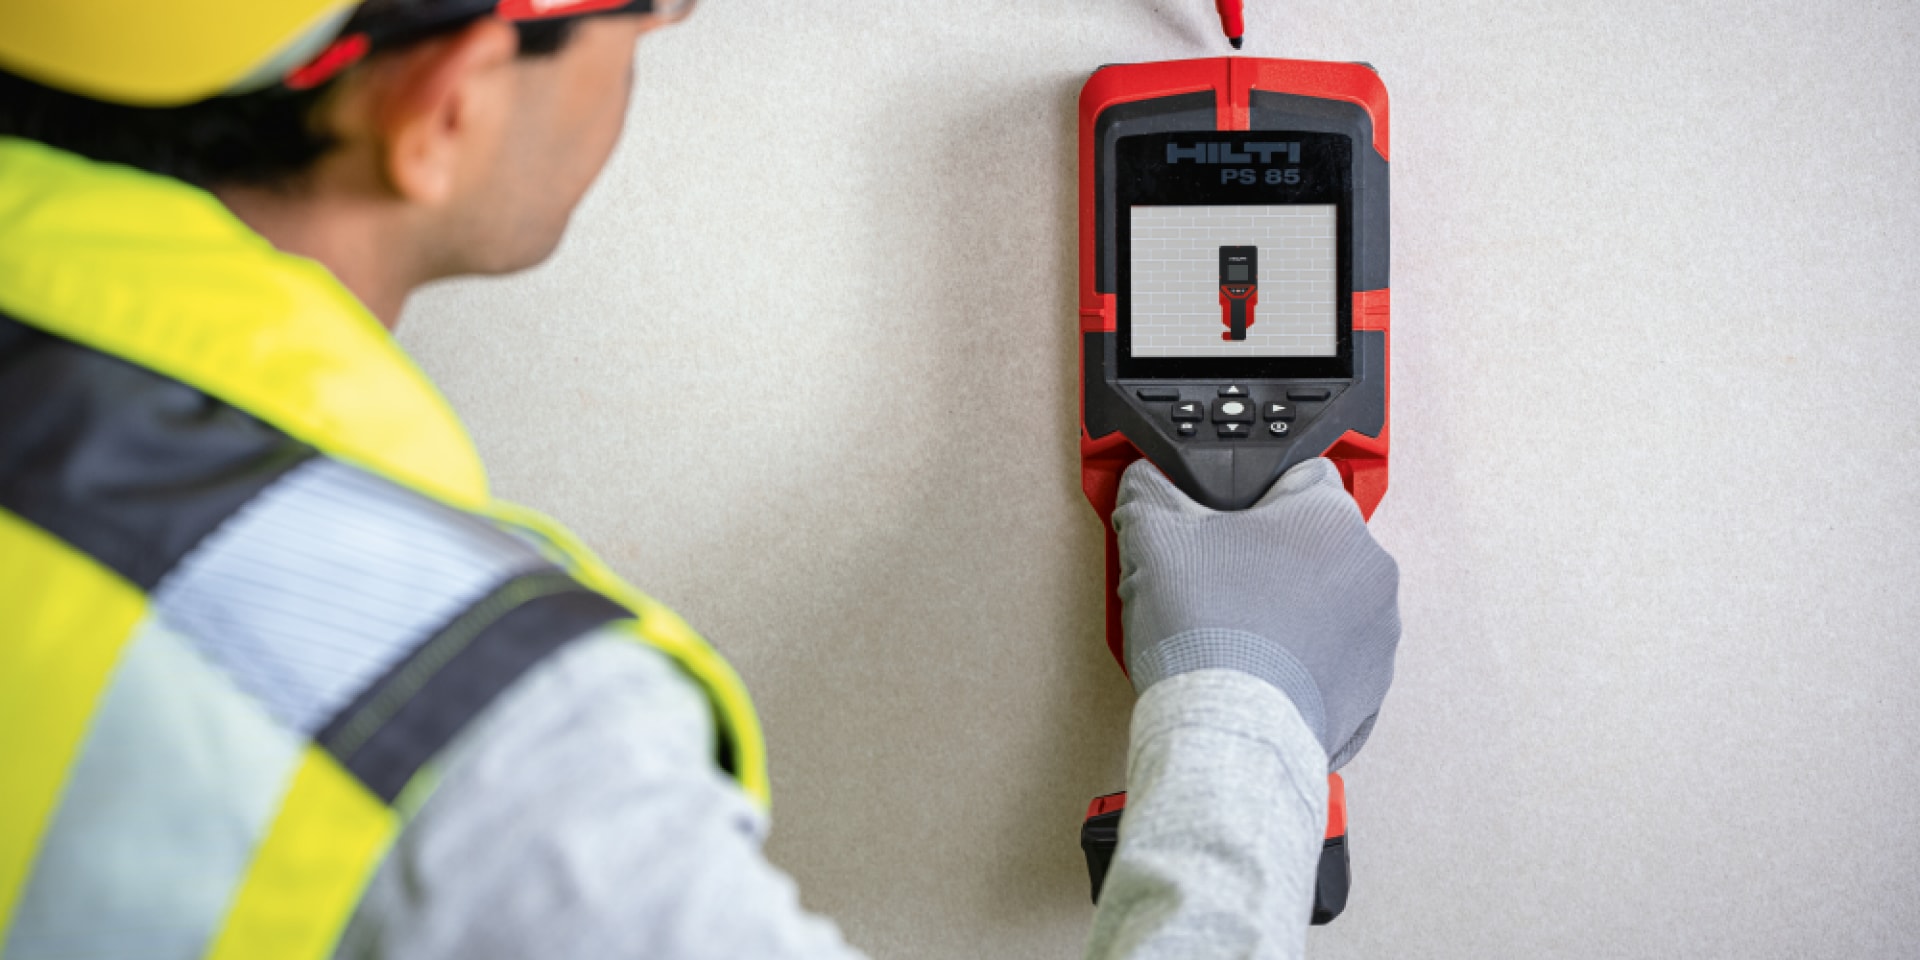 Hilti PS 50 Multidetector key features